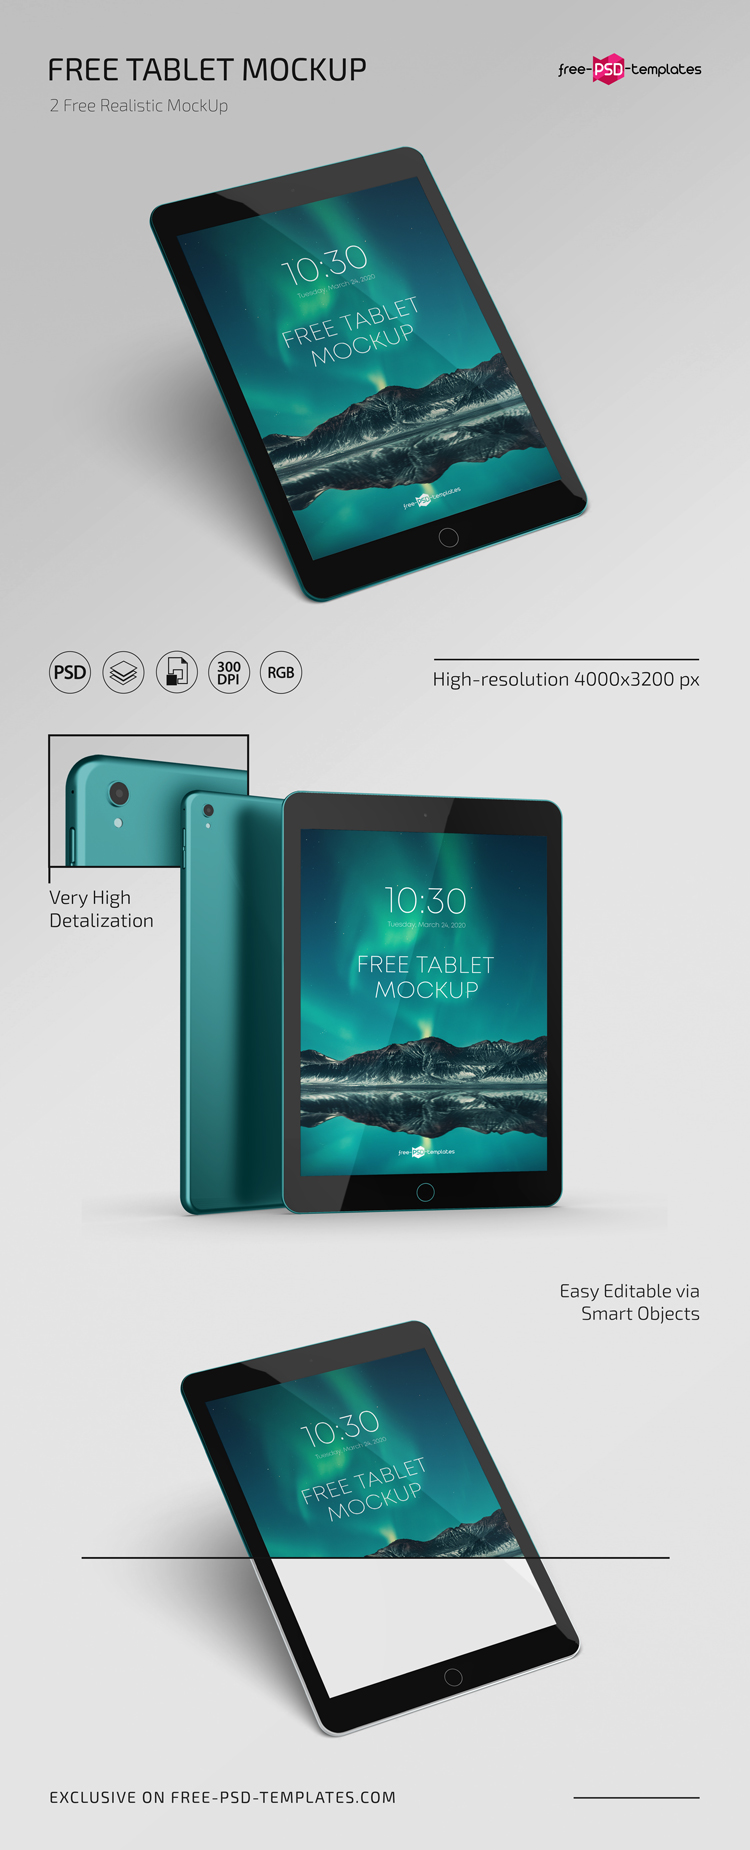 Download Free Photorealistic Tablet Mock-Up Template in PSD | Free PSD Templates